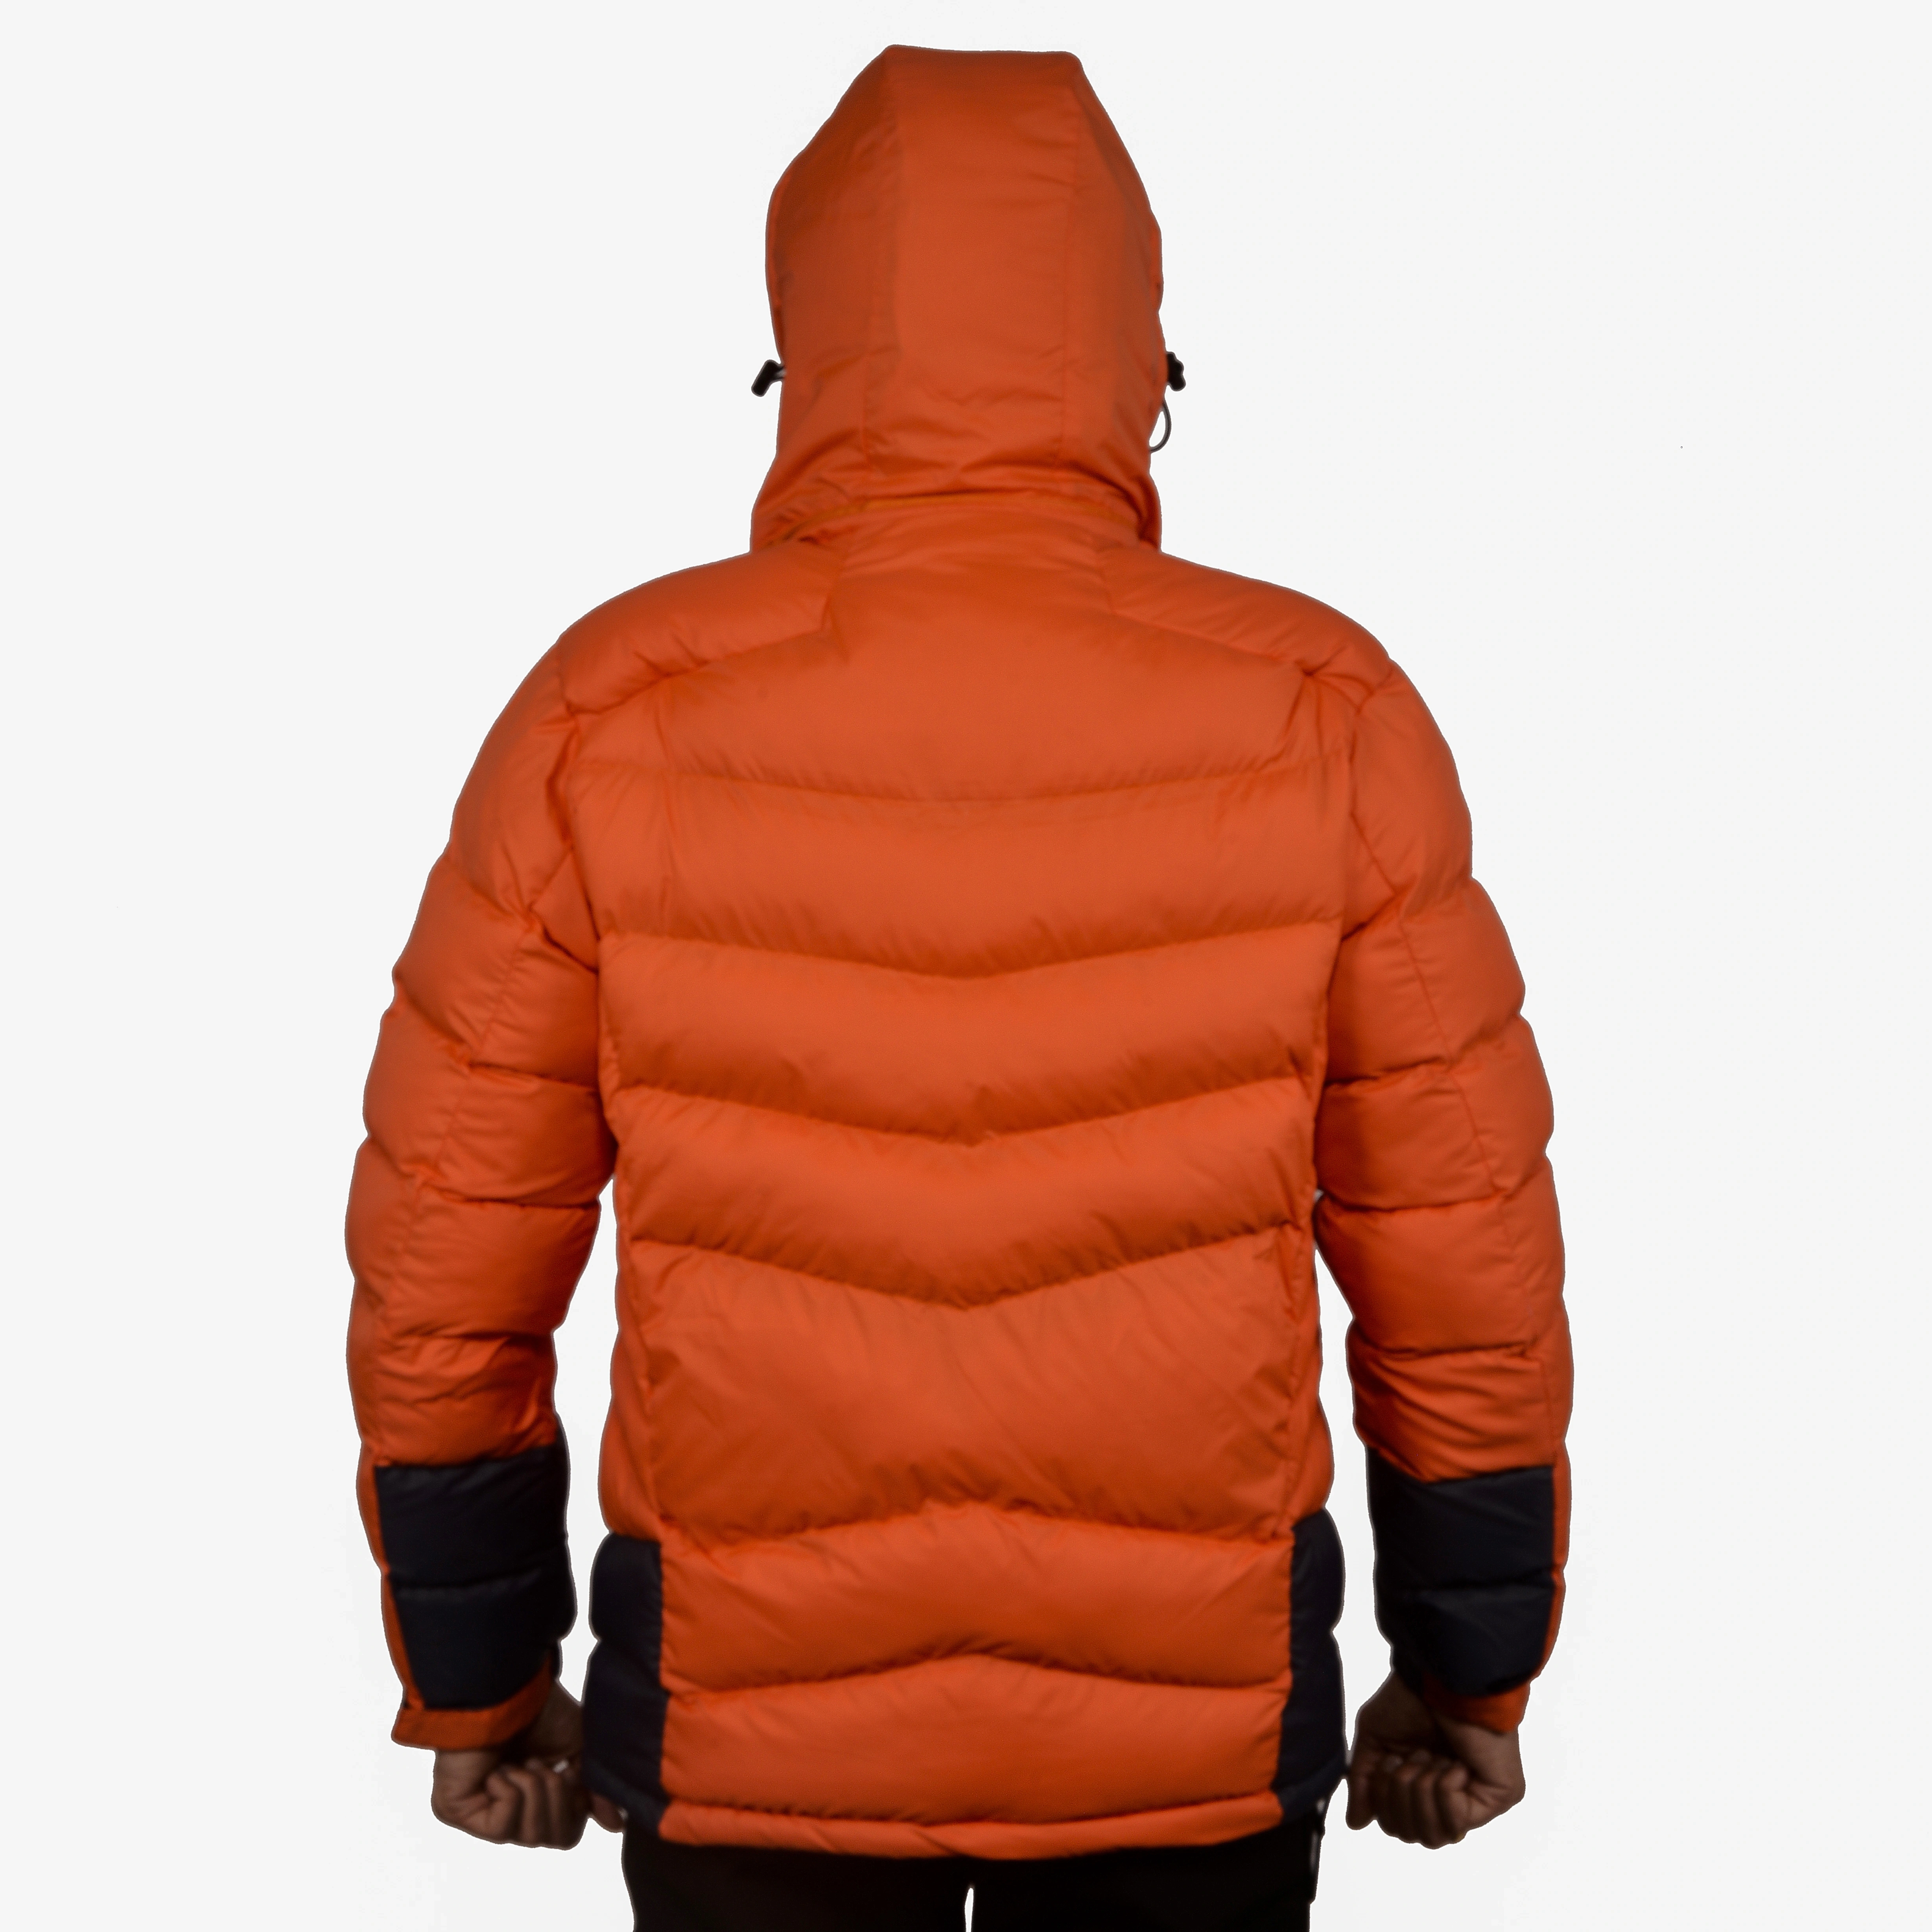 K2 Survivor Down Jacket for Men: Stylized Functionality for Extreme Cold Weather Expeditions (Up to -20°C)-L-Orange-3